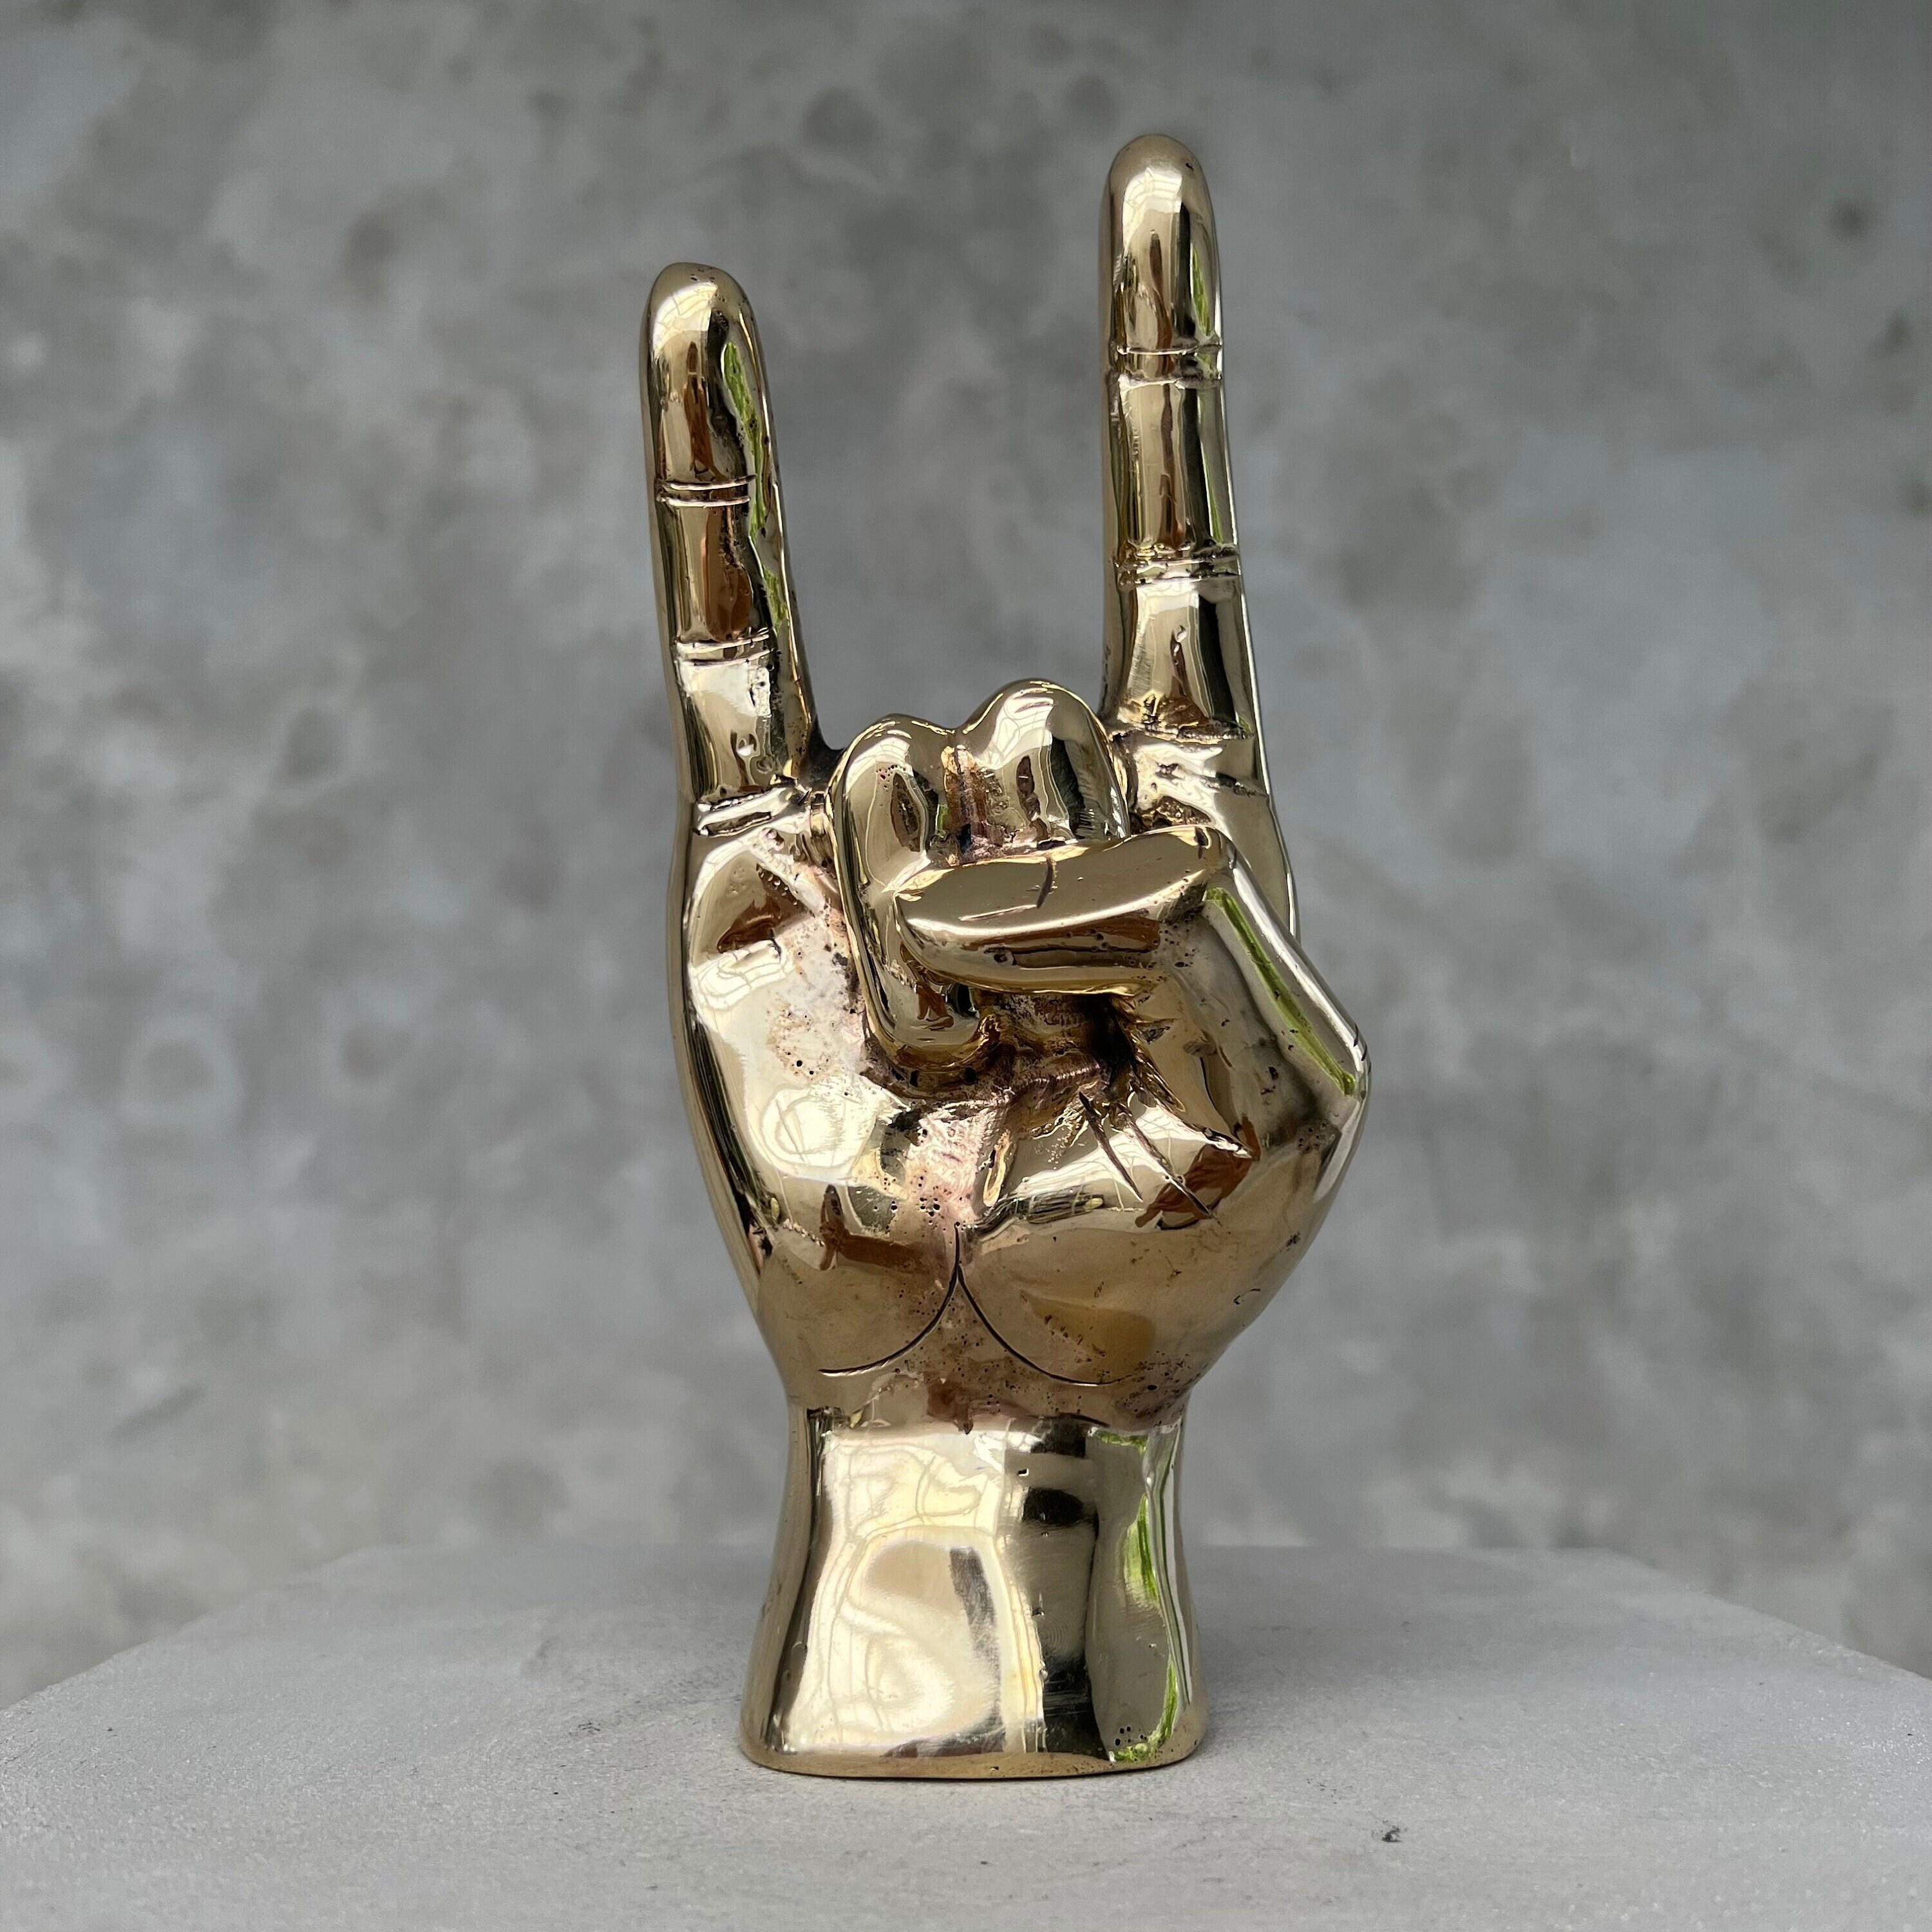 Rock on Hand Gesture Table Sculpture Aged Bronze